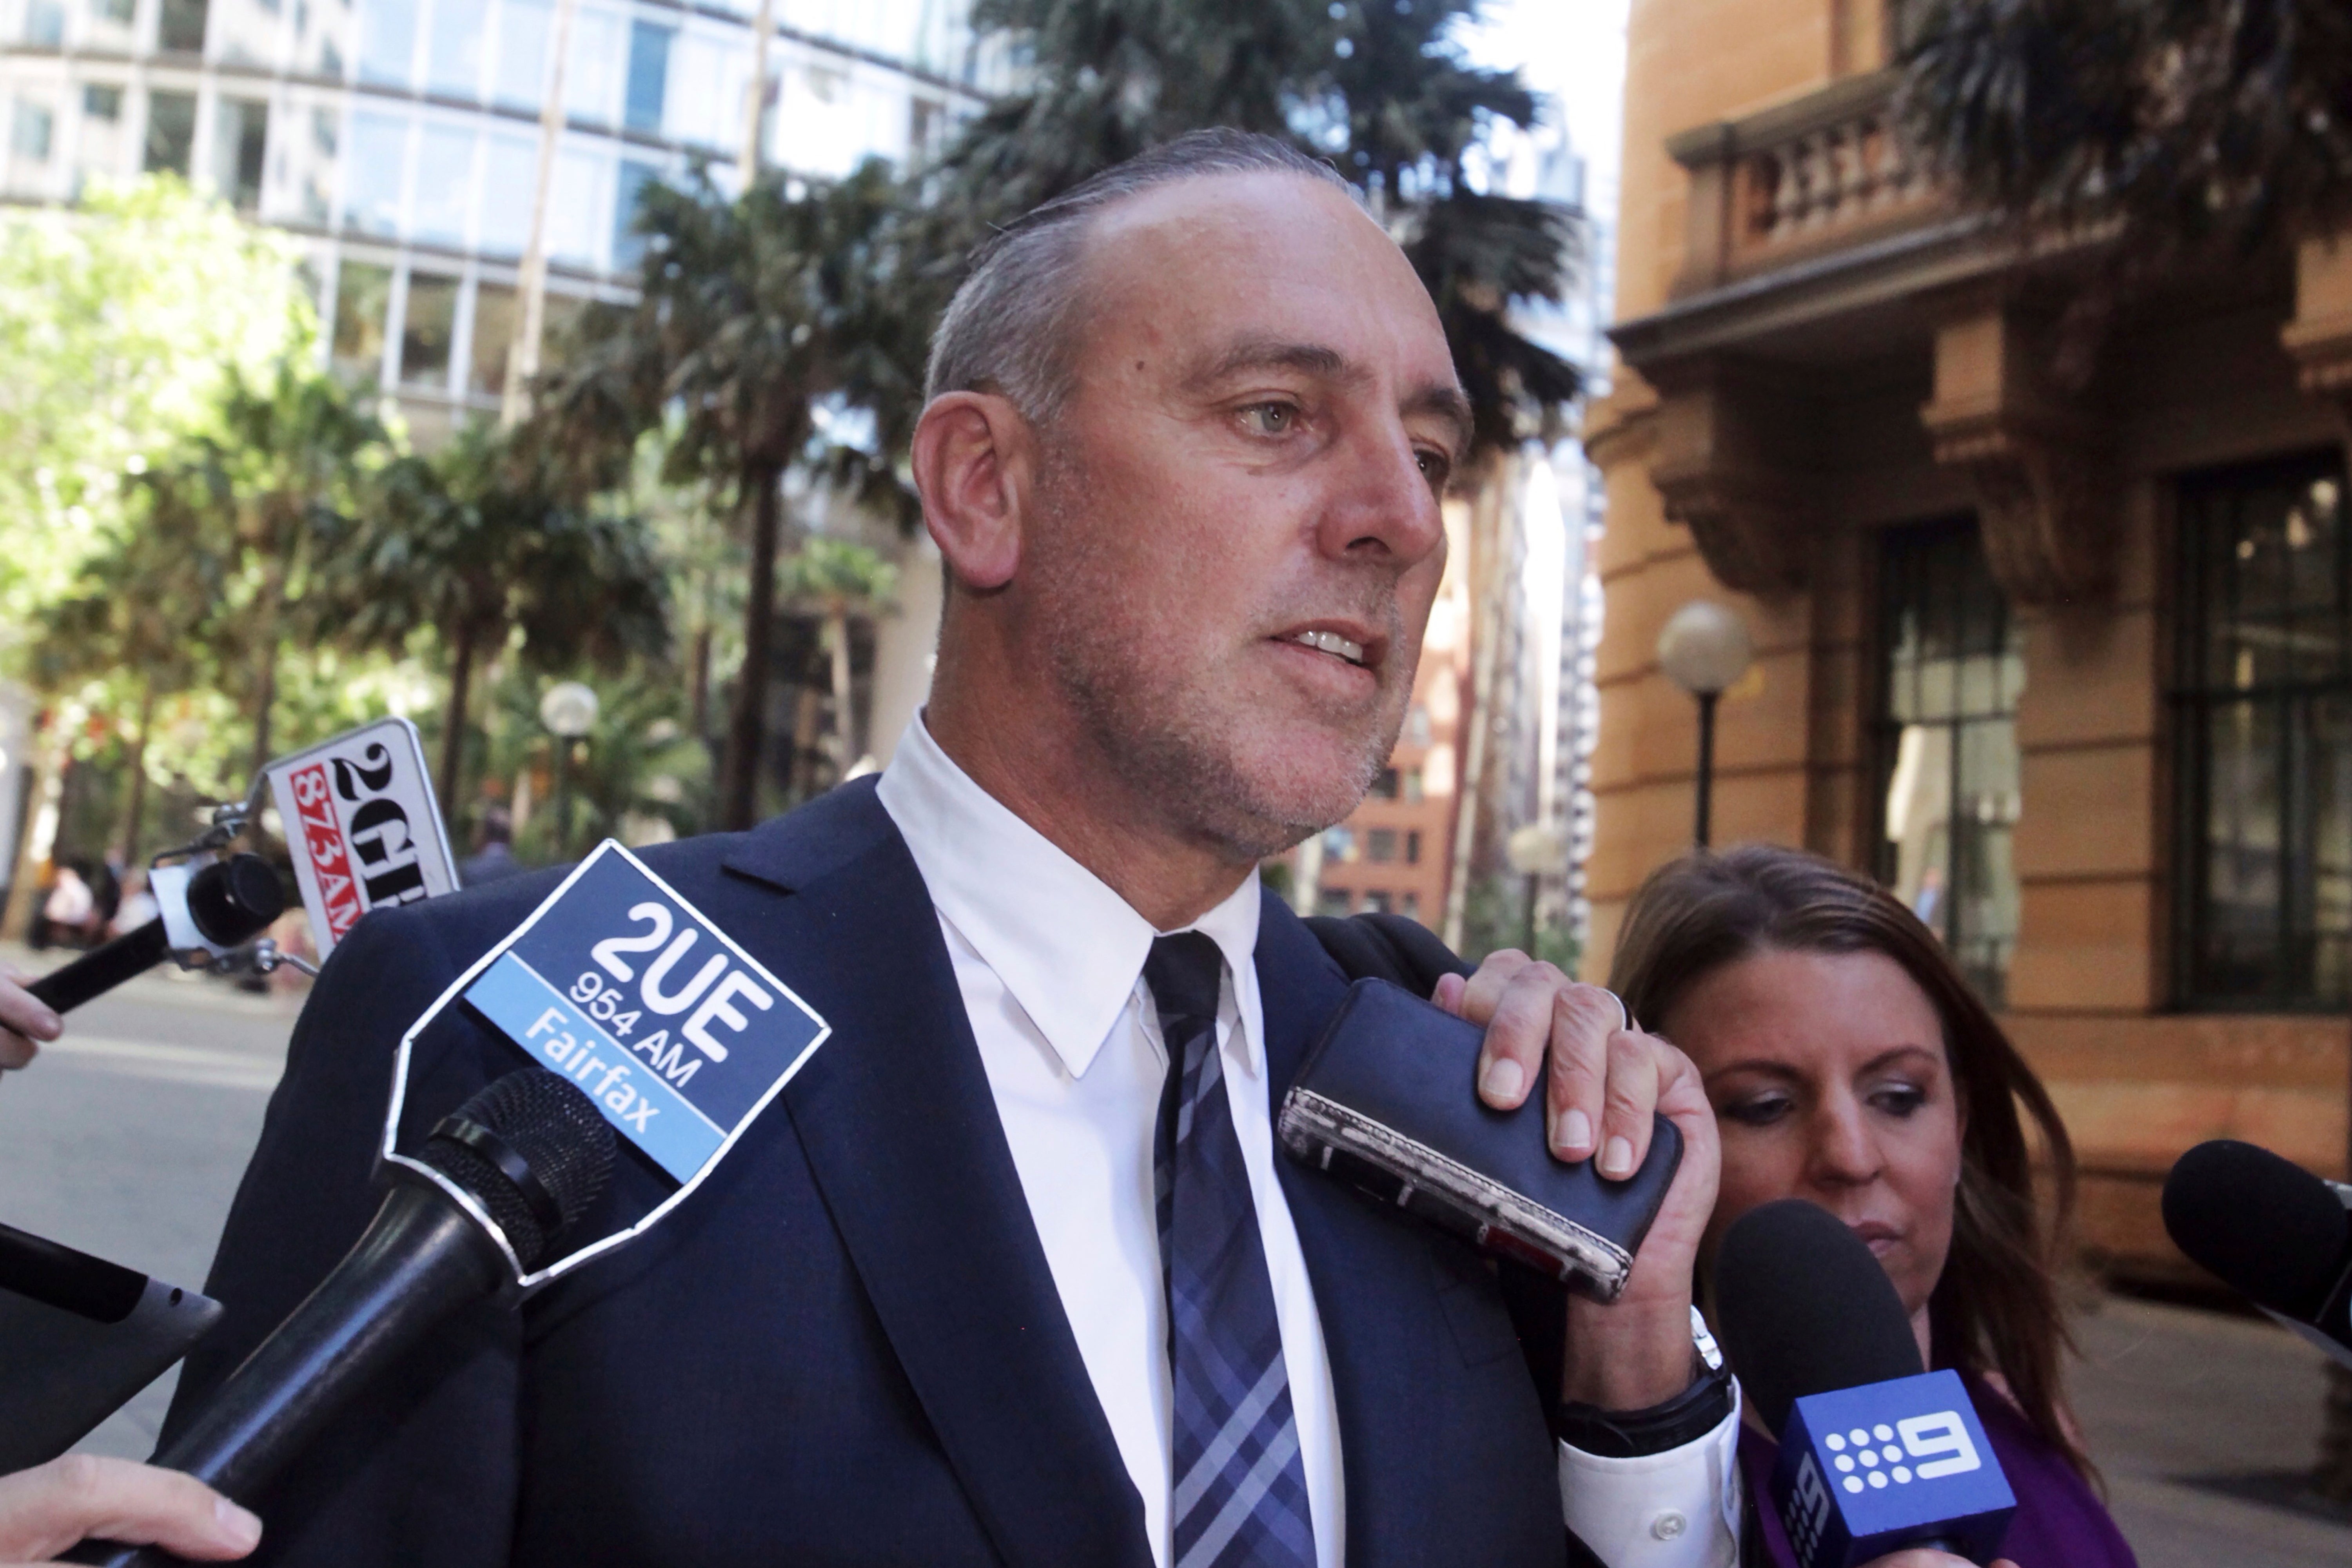 Hillsong Church founder Brian Houston has been summoned to appear in court in Sydney on October 5